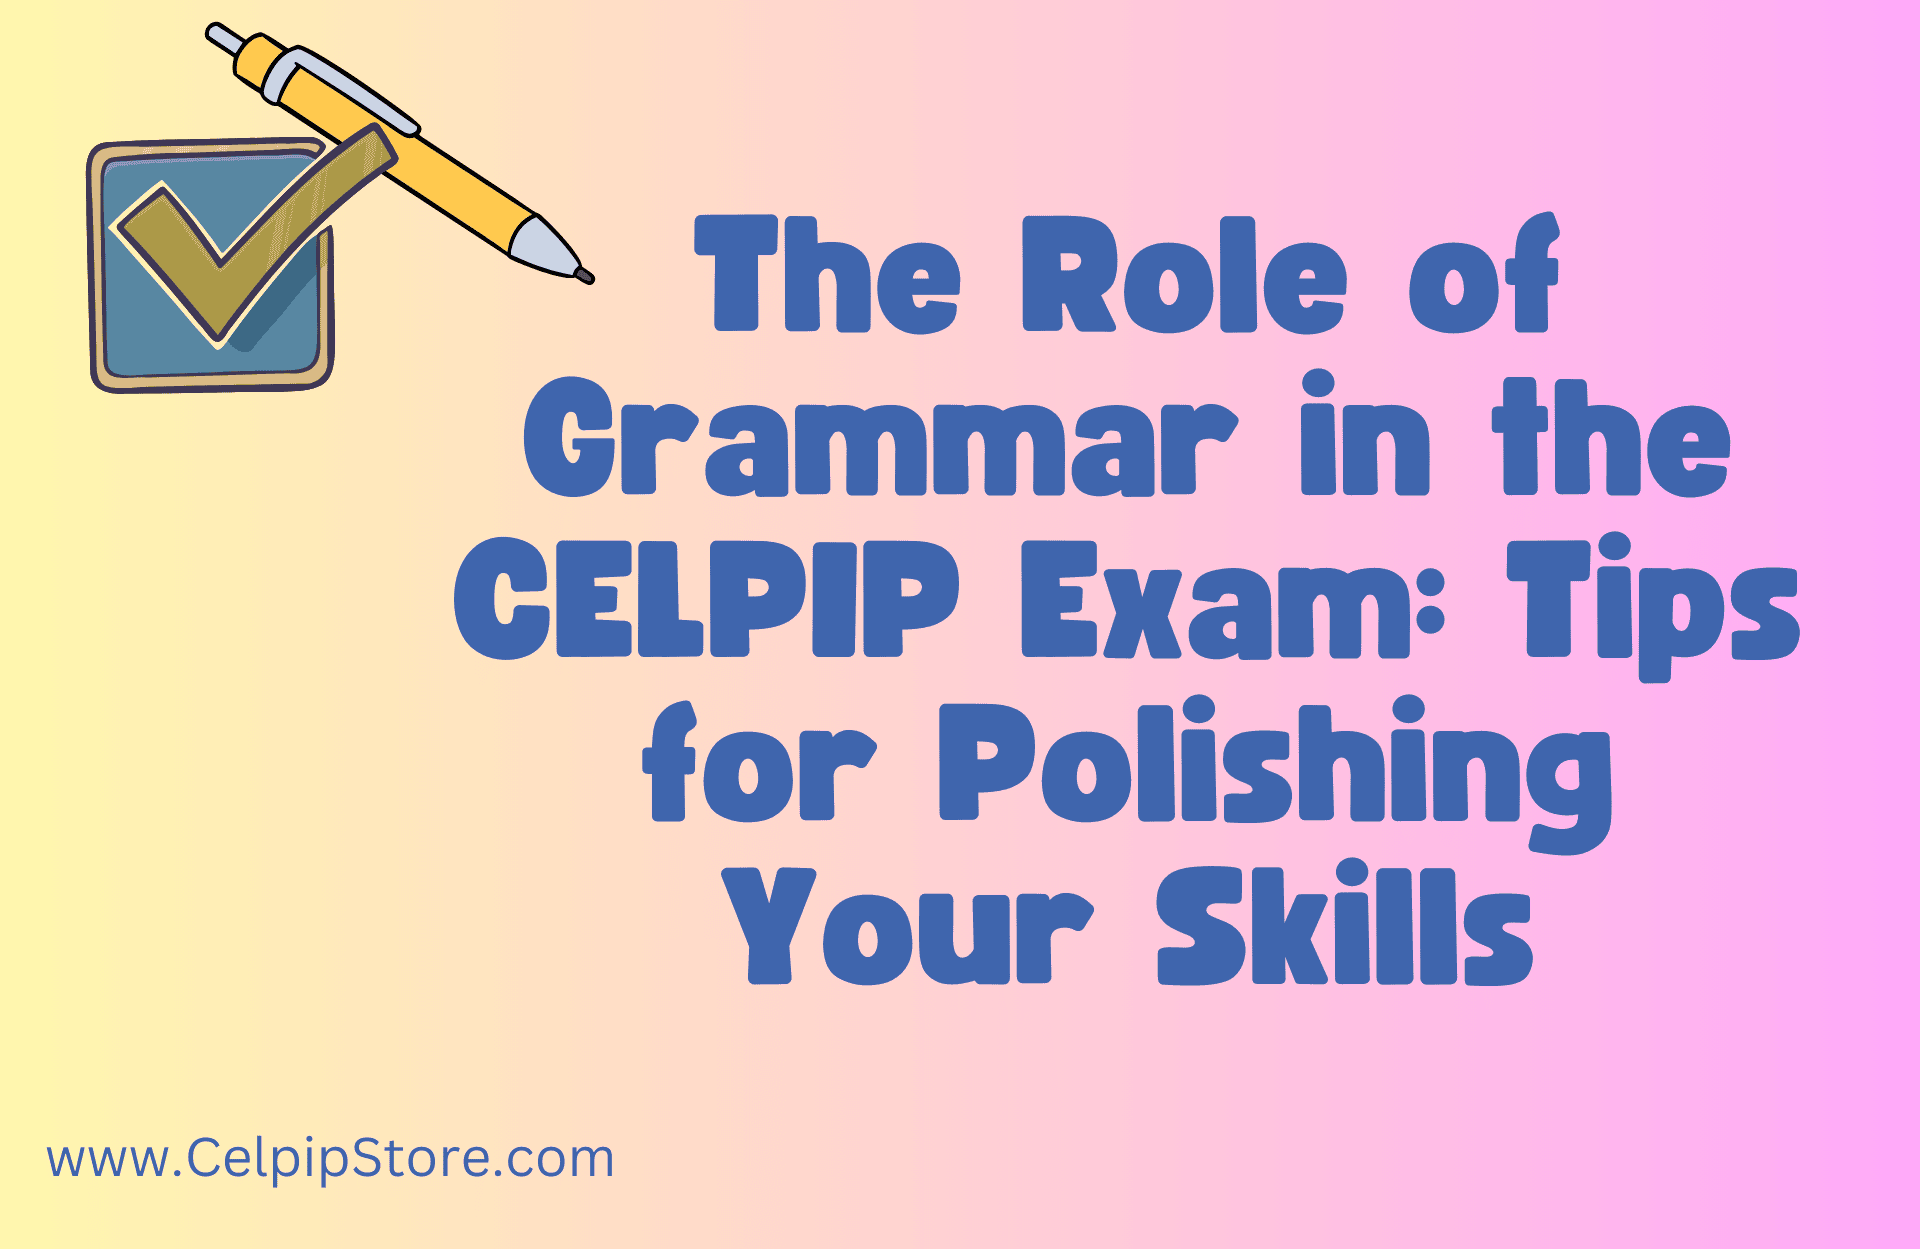 The Role of Grammar in the CELPIP Exam: Tips for Polishing Your Skills